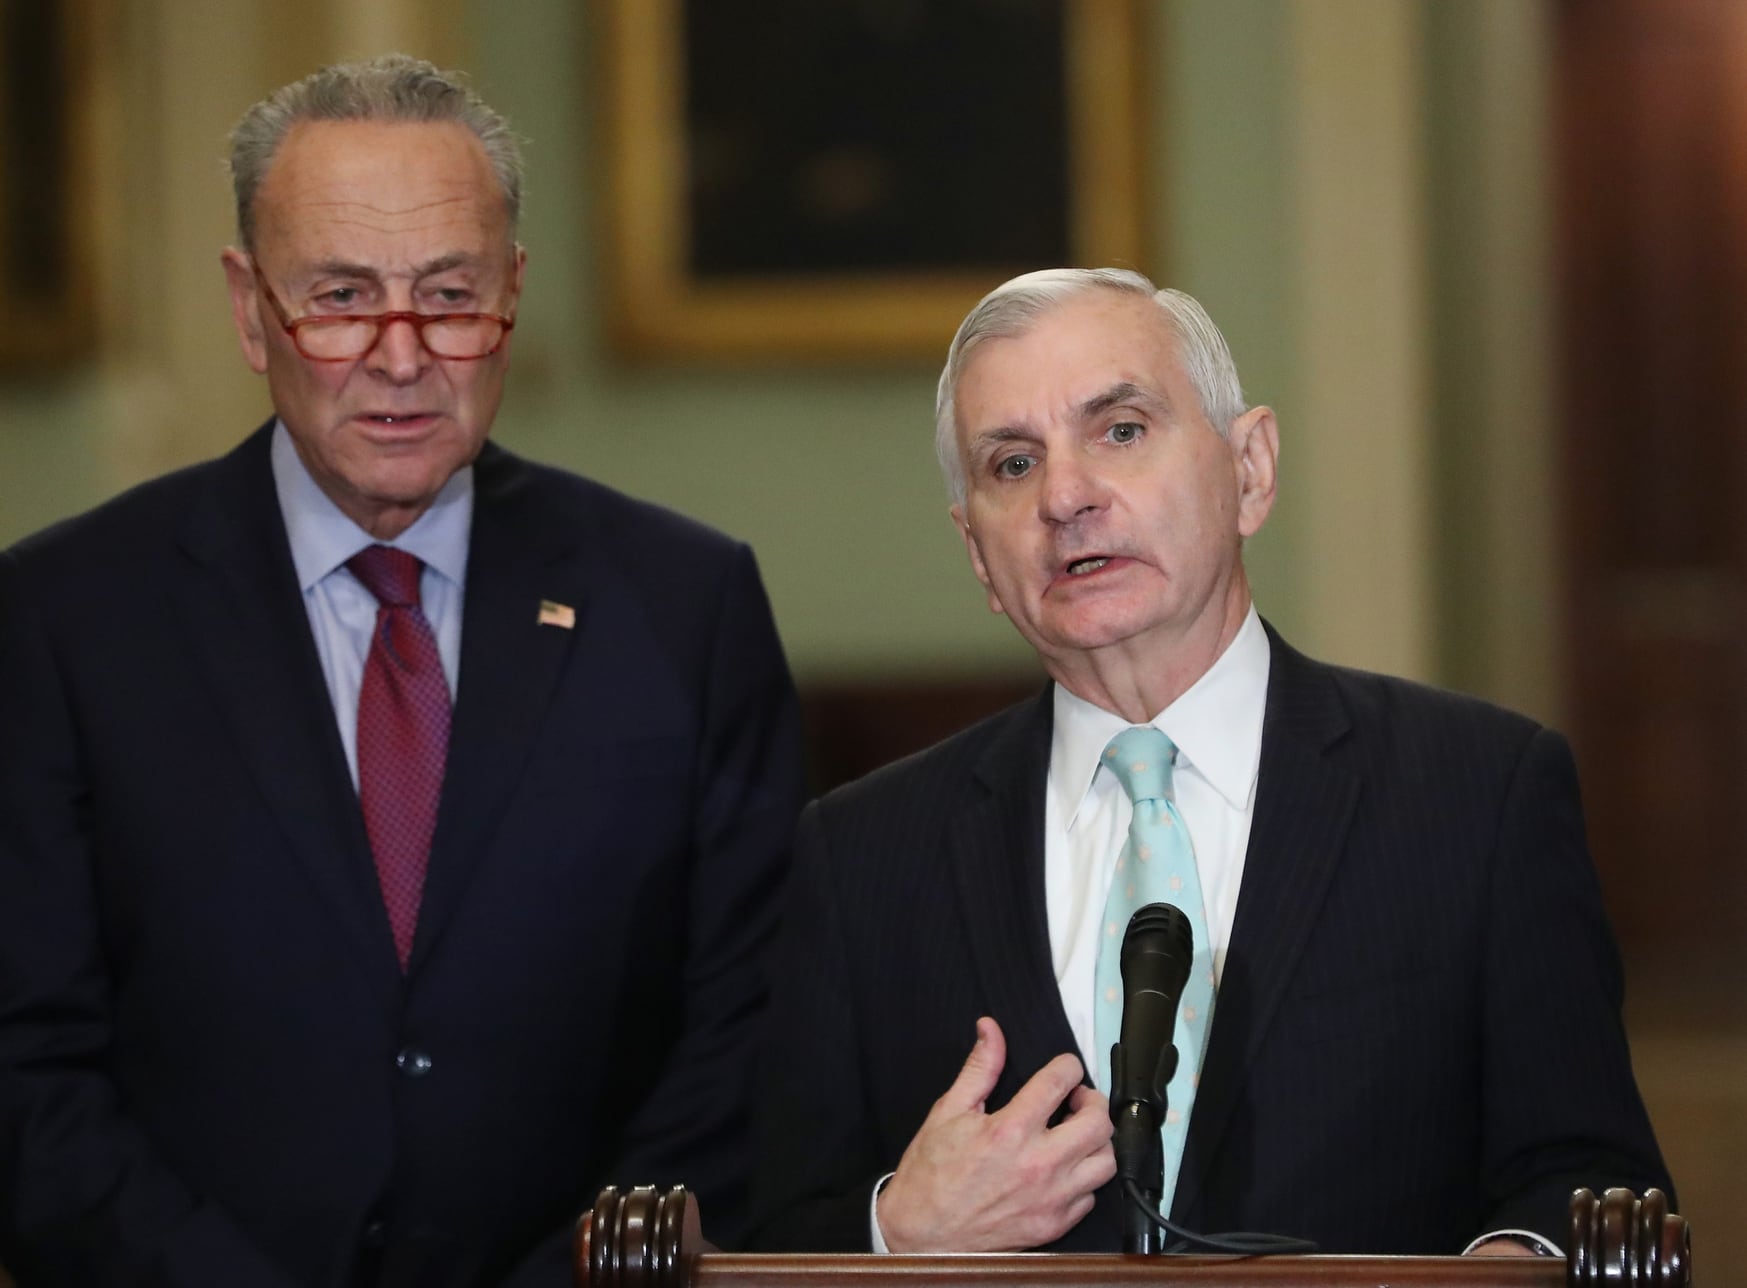 Sen. Jack Reed, D-R.I., right, and Senate Minority Leader Chuck Schumer, D-N.Y., speak to the media after attending the Democratic weekly policy luncheon on Capitol Hill on Oct. 22, 2019. Reed spoke about the situation in Syria. (Mark Wilson/Getty Images)